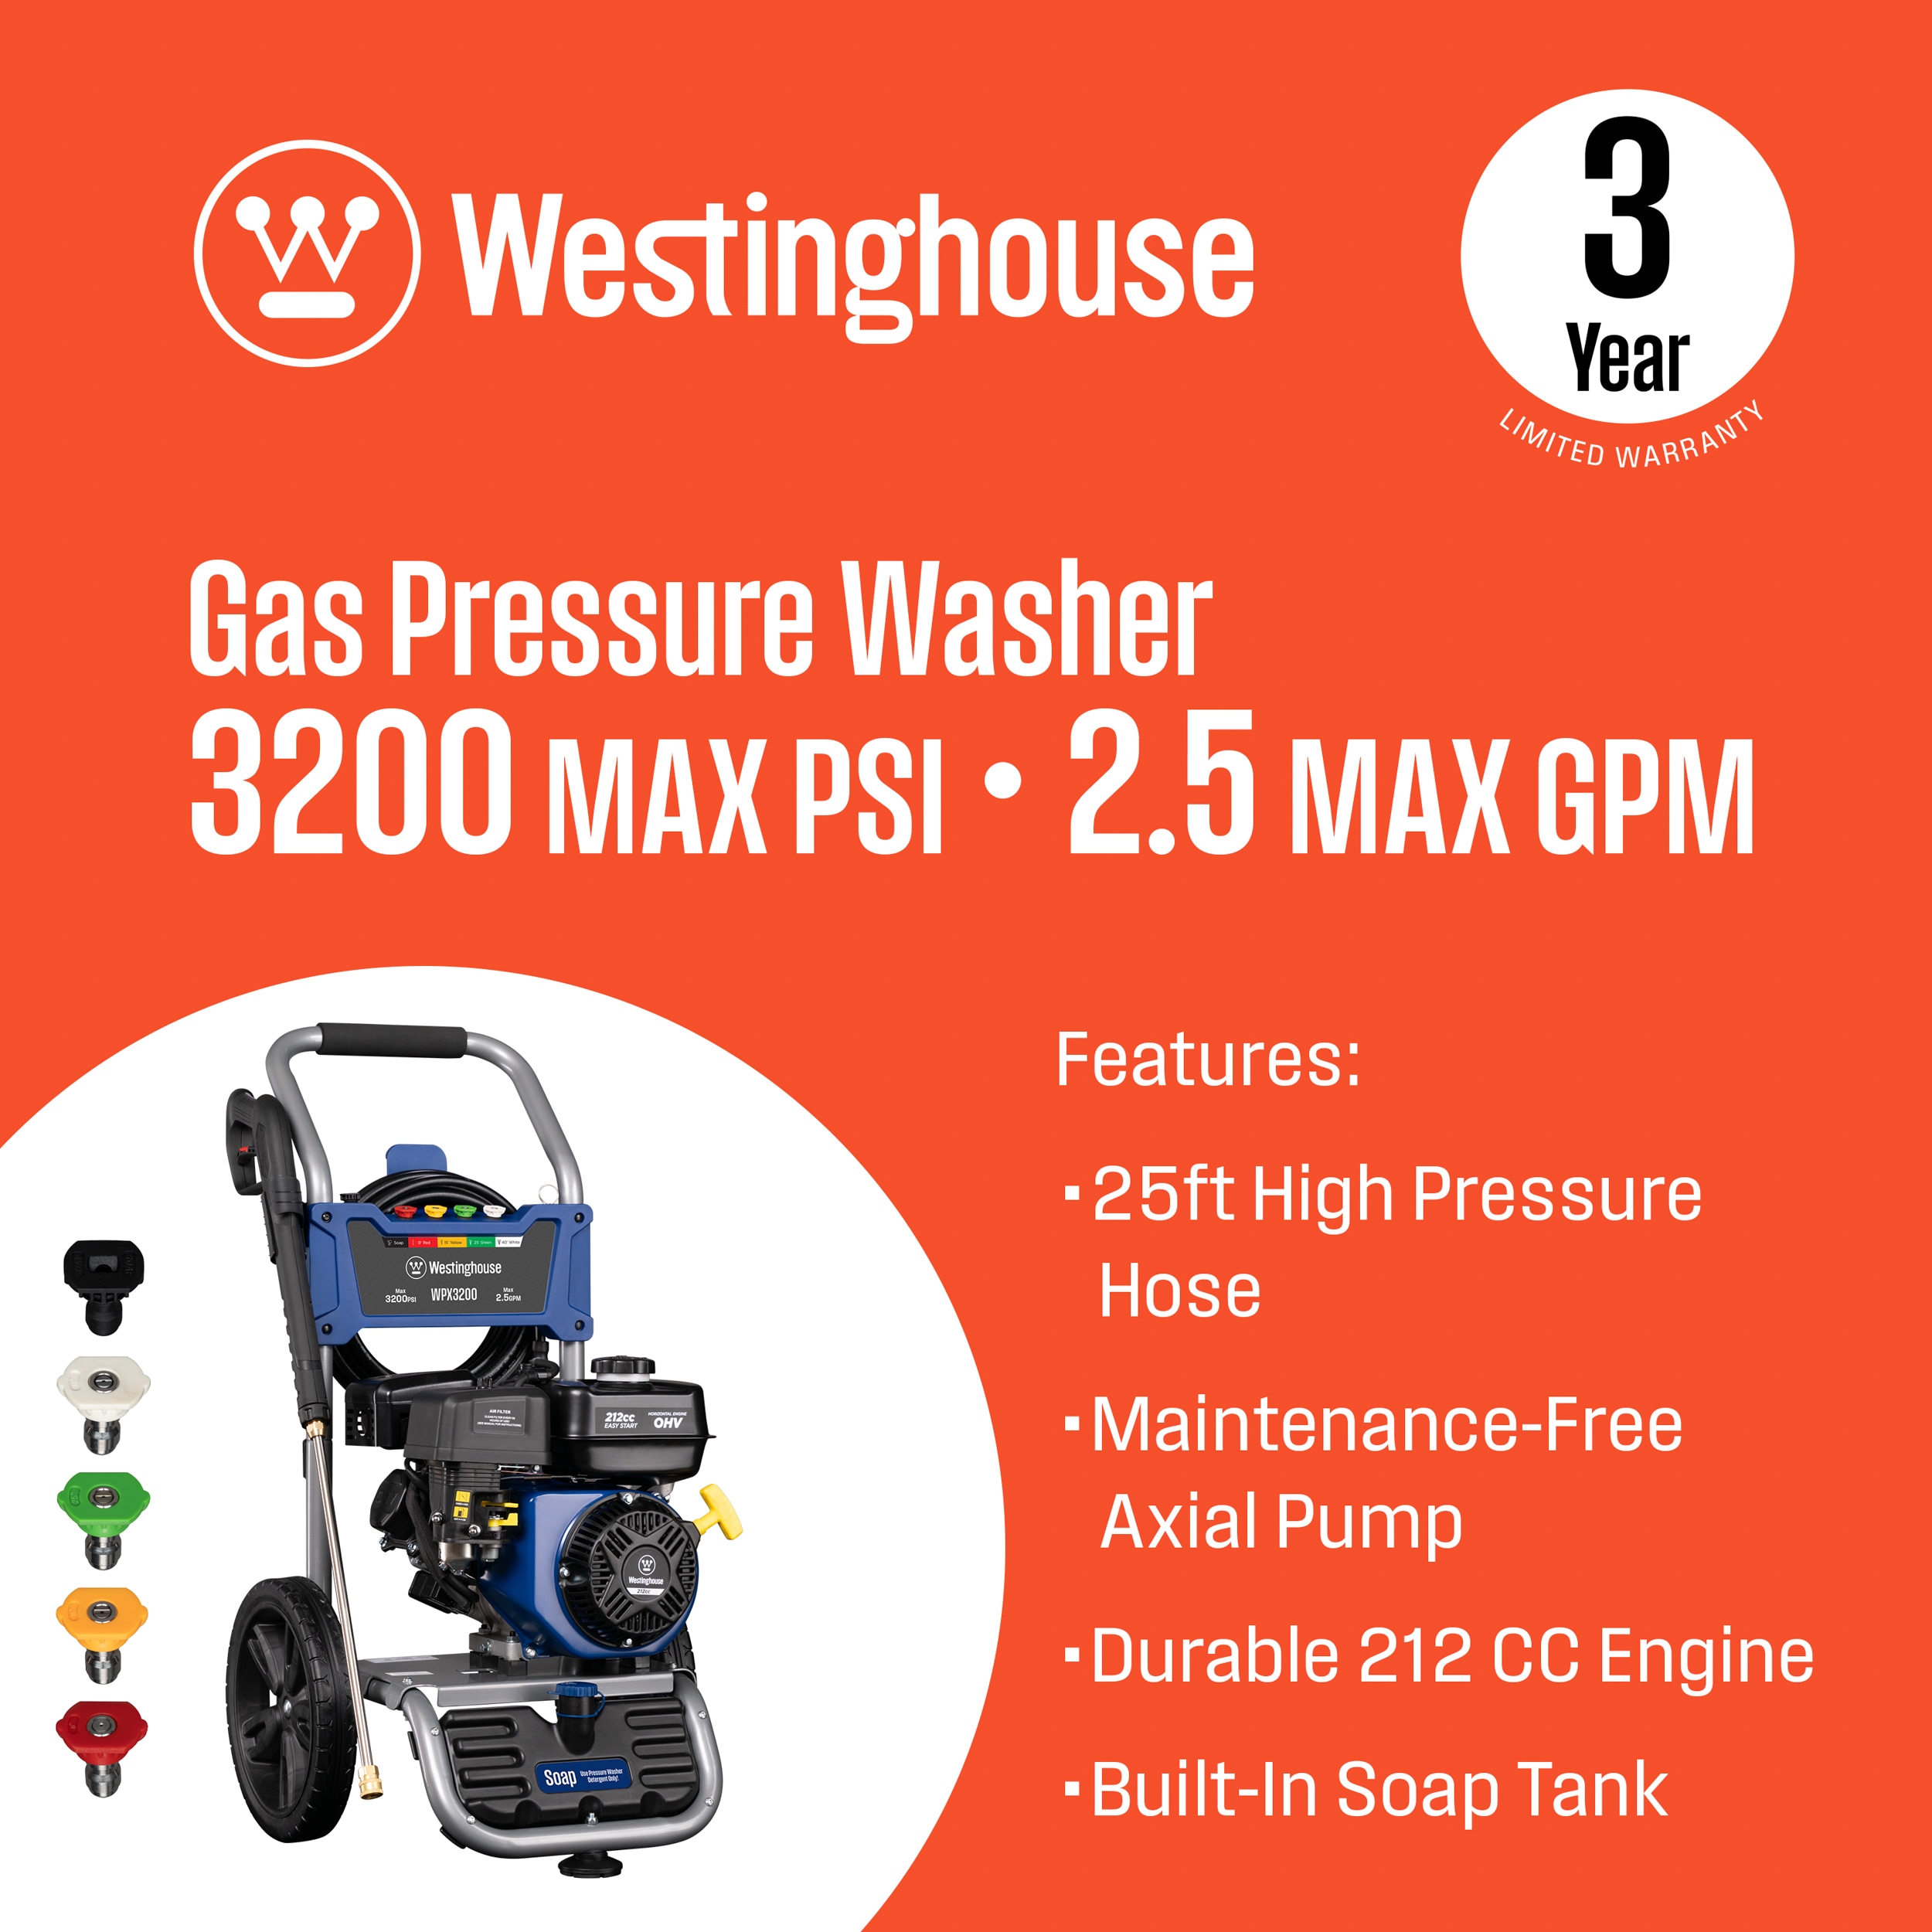 Heavy-duty Pressure Washers at